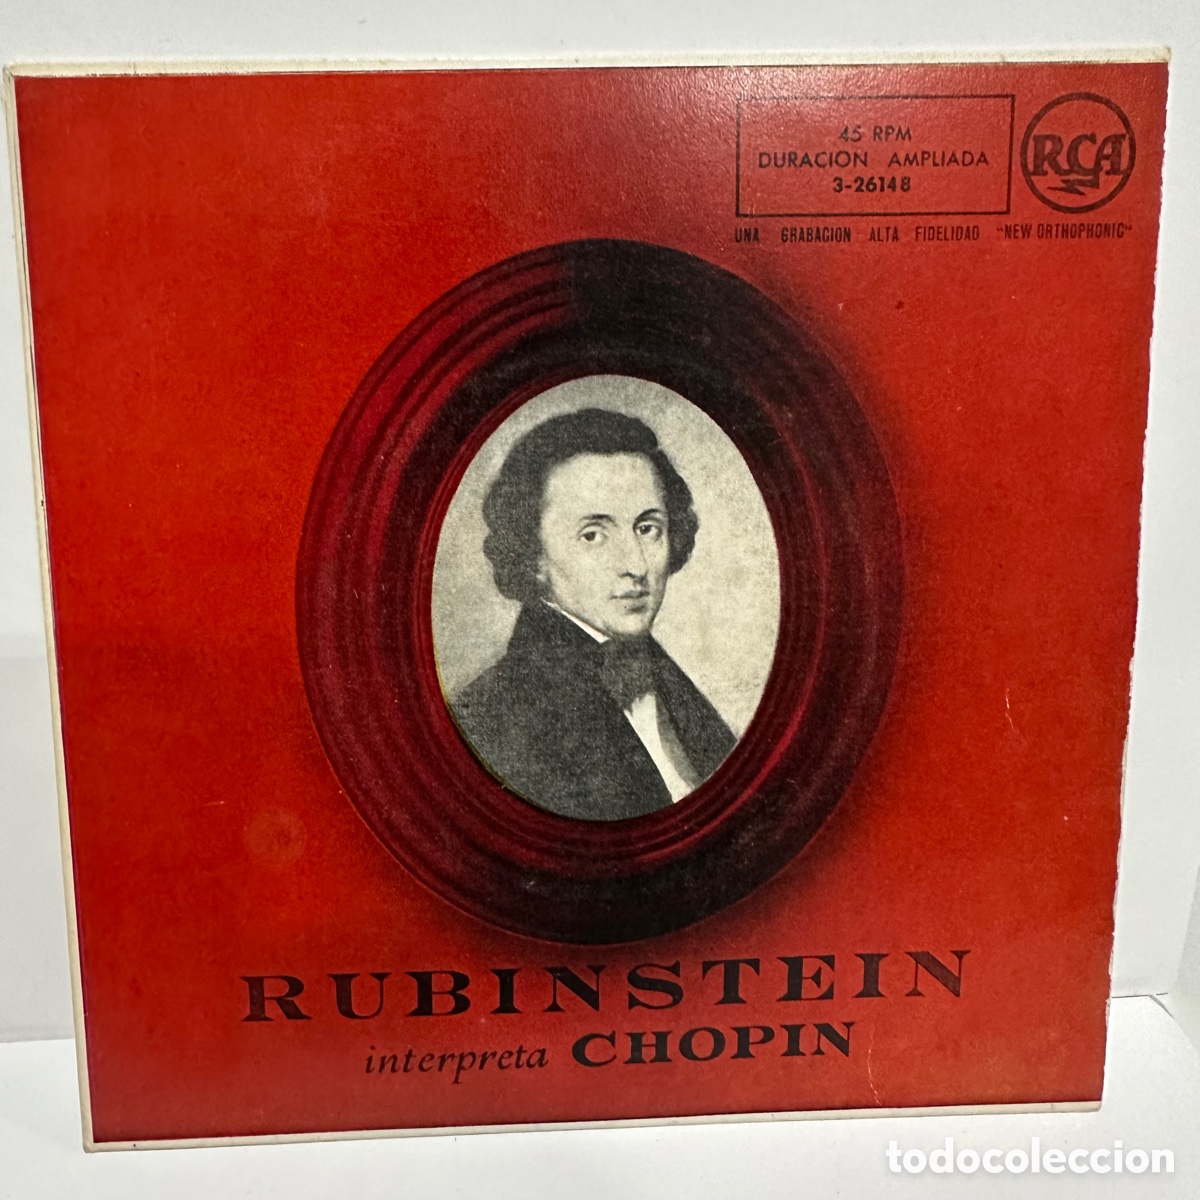 rubinstein　EP　Opera,　vinyl　on　arturo　ep)　Zarzuela　chopin　records　of　Marches　Classical　(7”,　and　todocoleccion　Buy　Music,